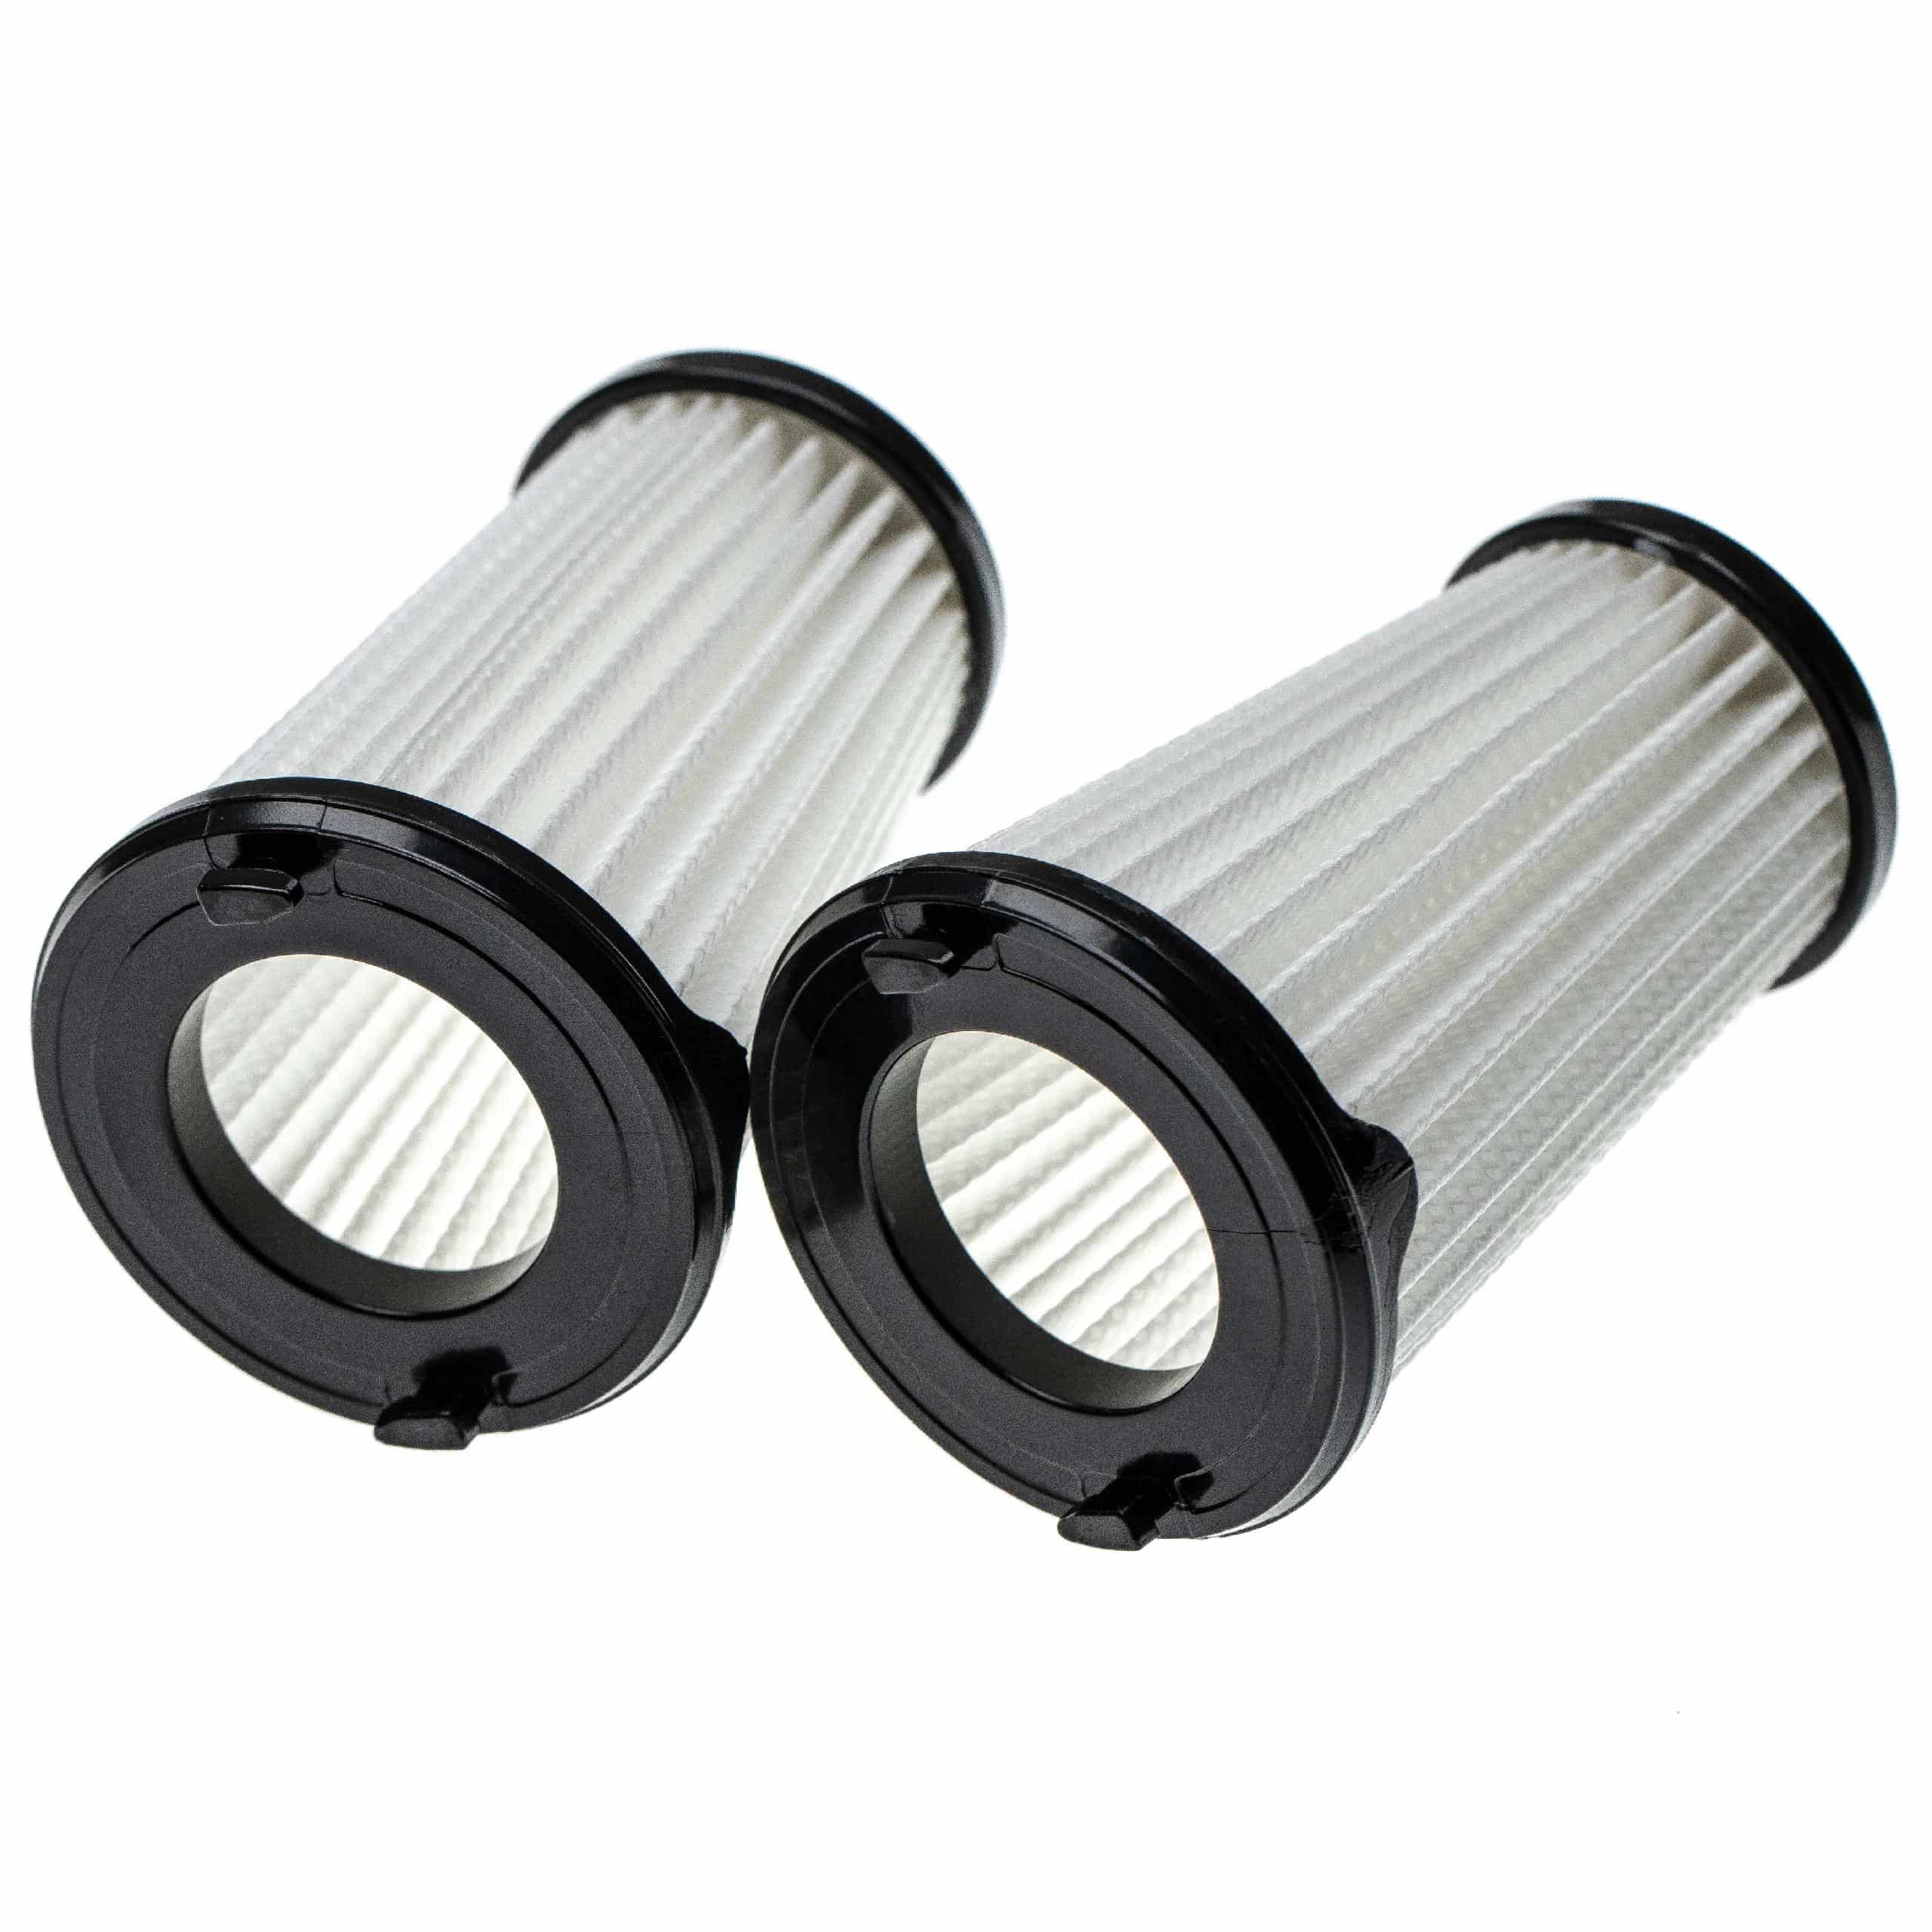 6x pleated filter replaces AEG AEF150, 9001683755, 90094073100 for ElectroluxVacuum Cleaner, black / white